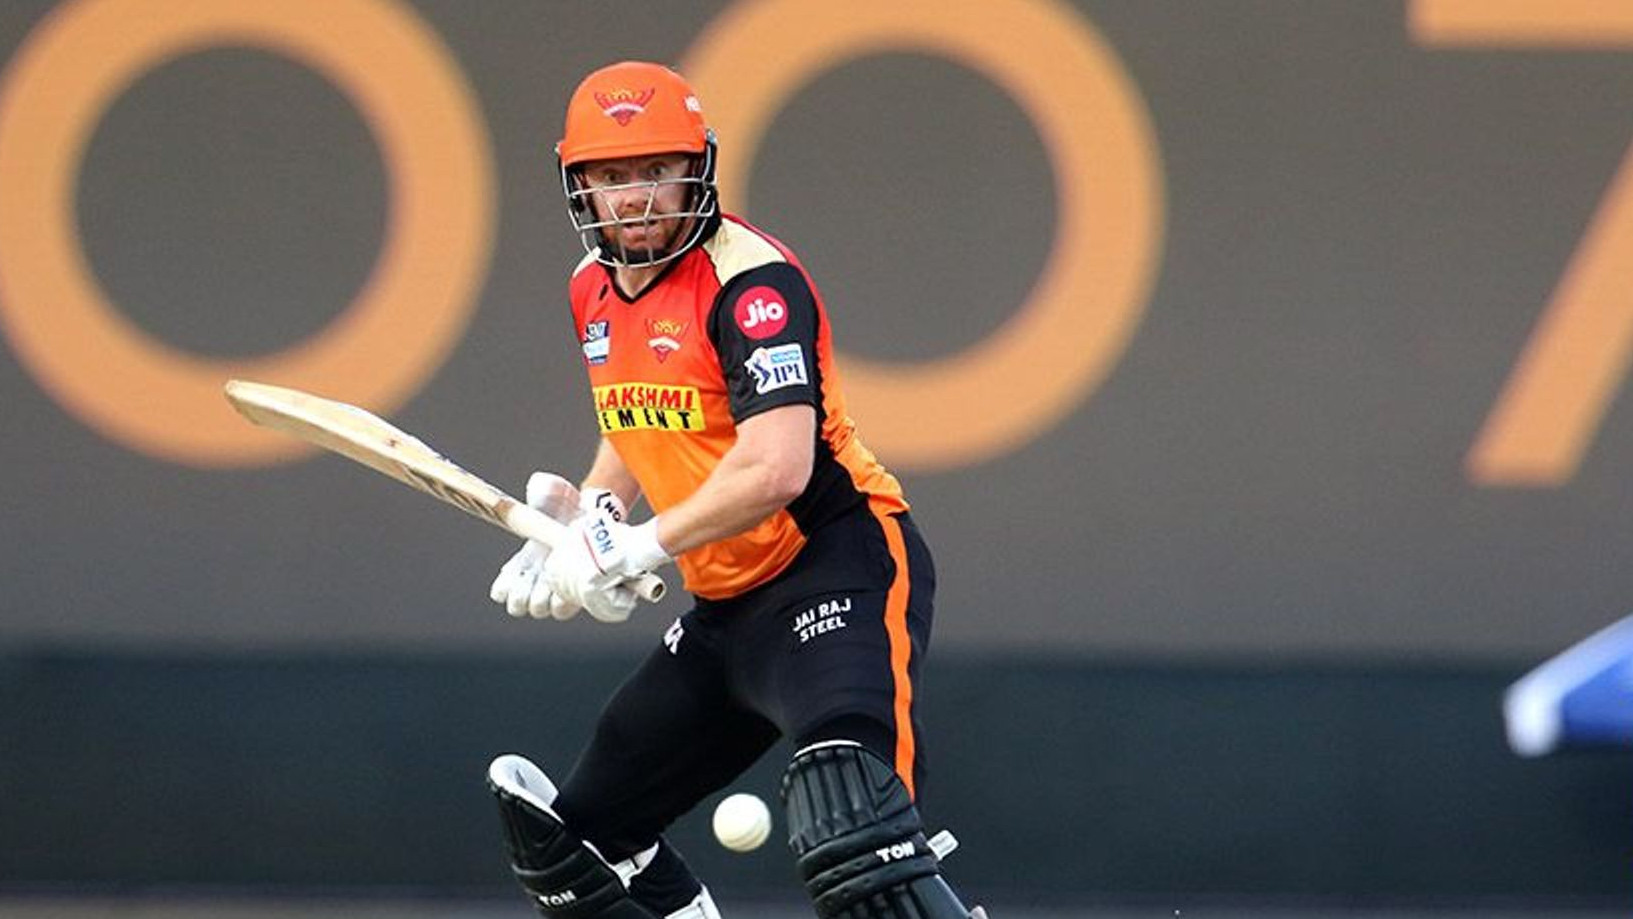 IPL 2021: Jonny Bairstow 'over the moon' after Sunrisers Hyderabad's win over Punjab Kings